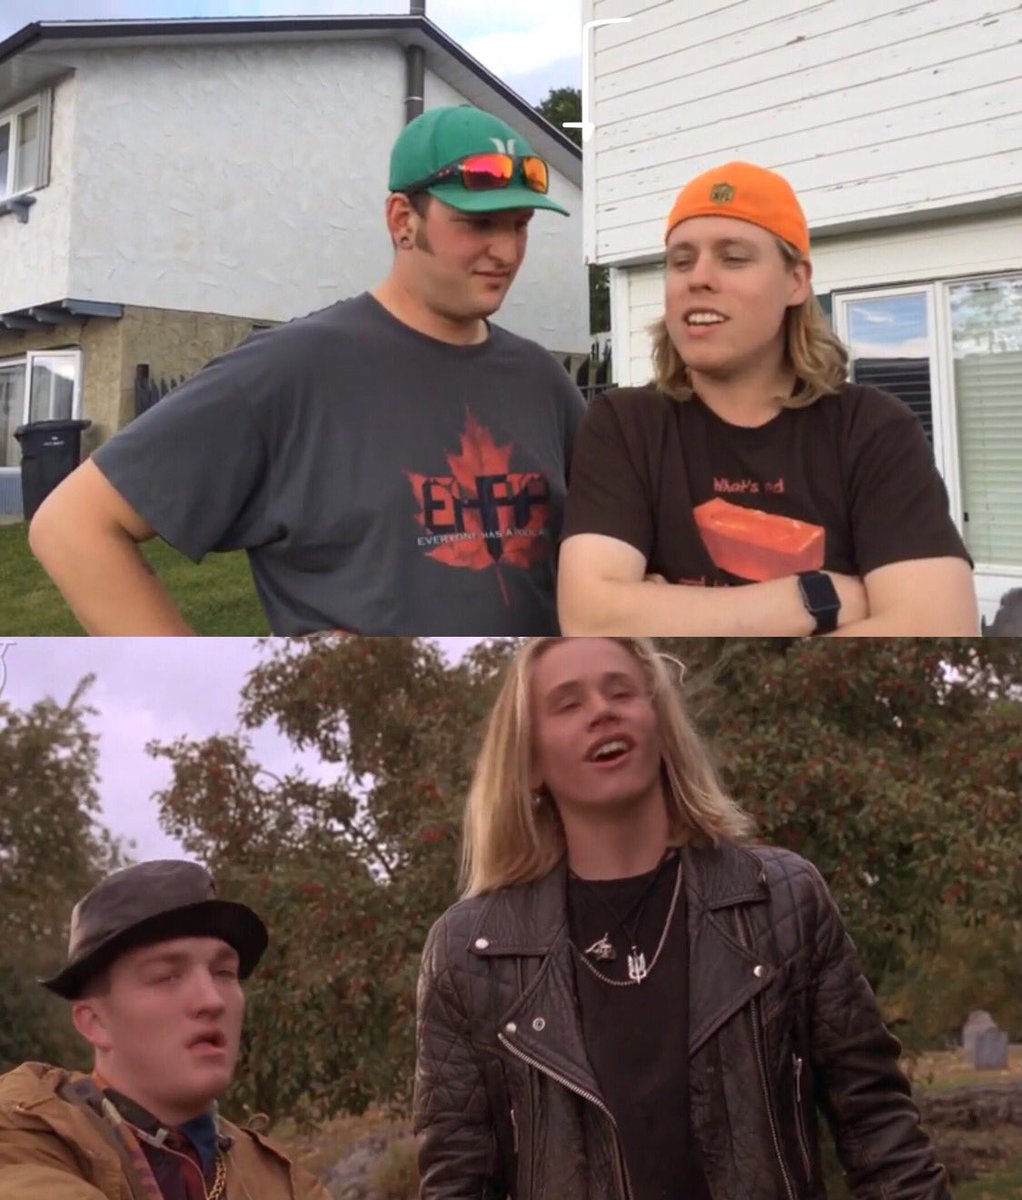 Hey @EHAPPodcast. Has anyone ever mentioned how much @AdamDotNet and Bryon look like the bullies from Hocus Pocus? Shit’s cracking me up over here.